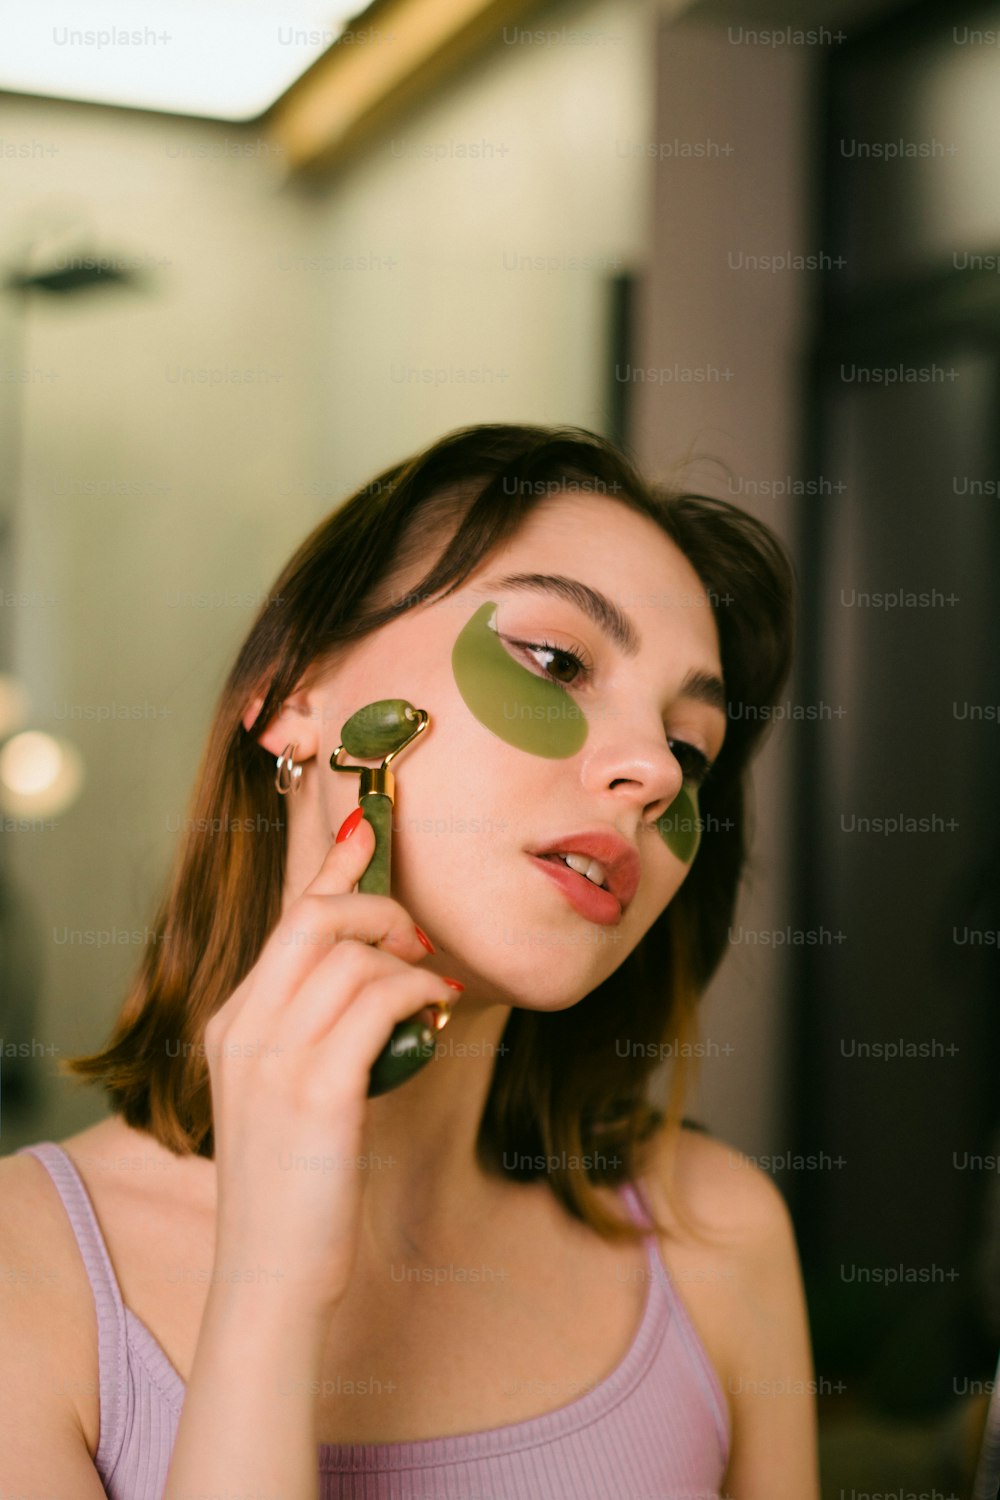 a woman holding a green object in front of her face